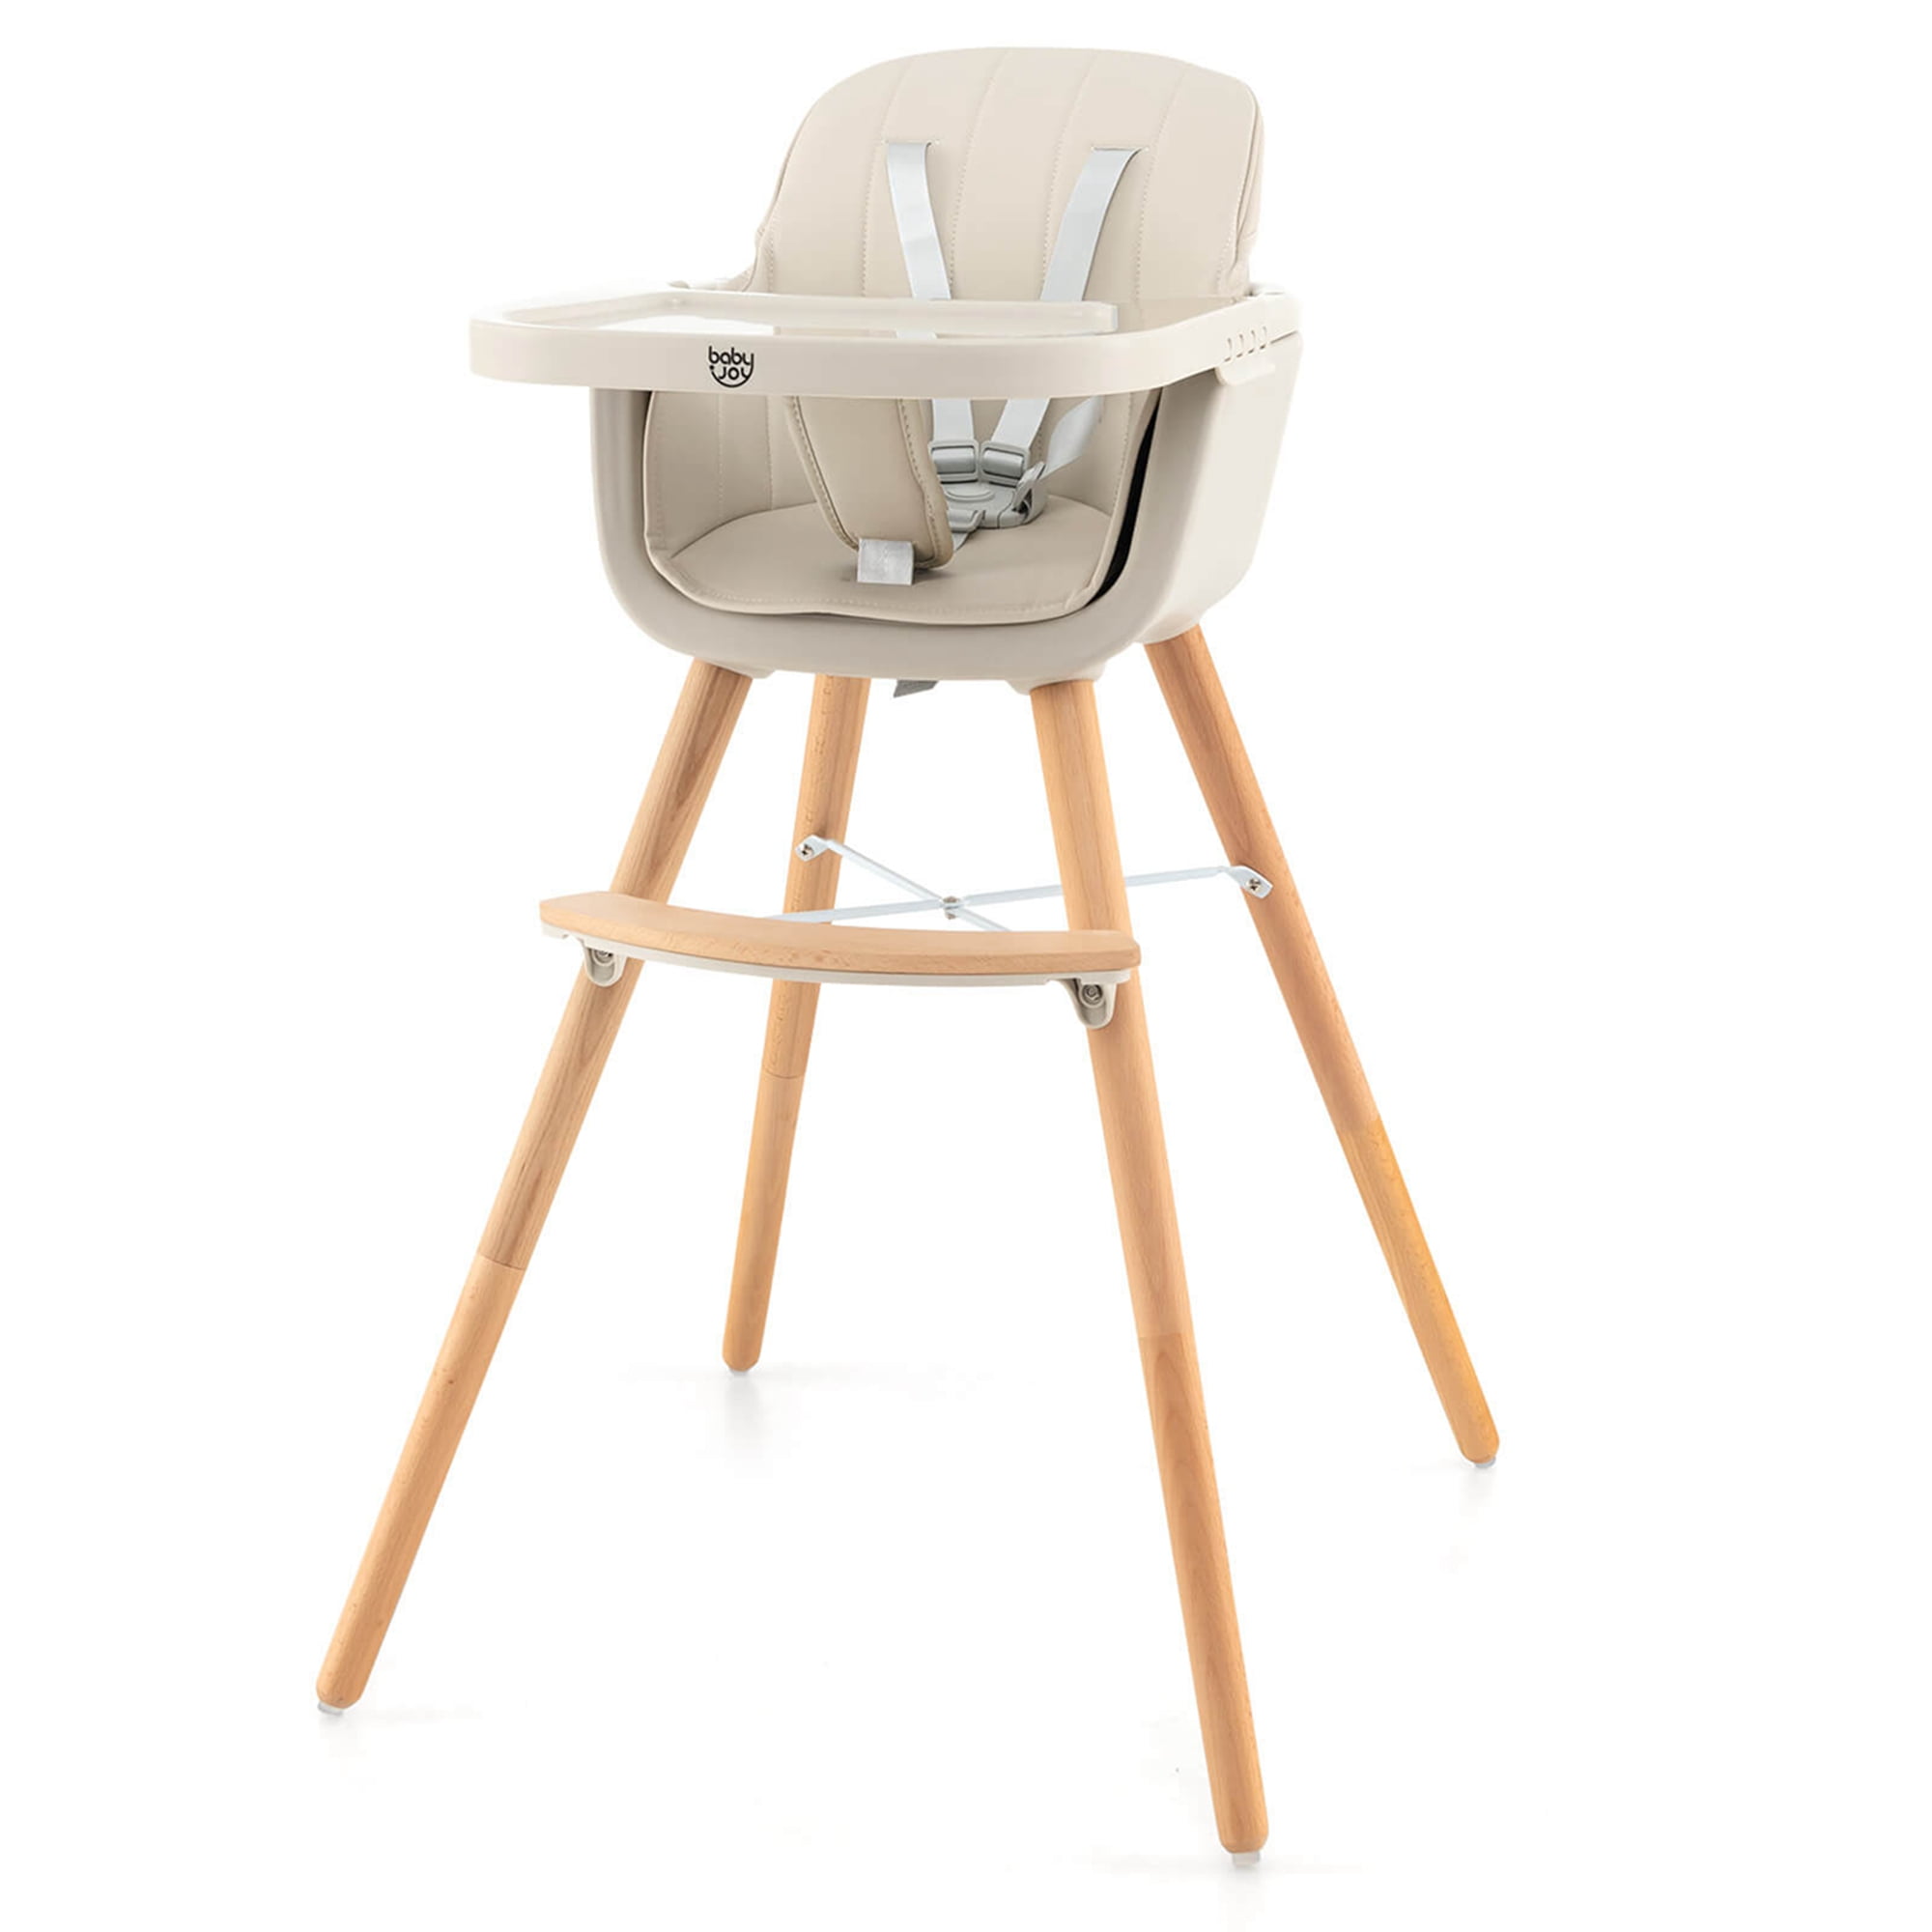 Babyjoy 3 in 1 Convertible Wooden High Chair Toddler Feeding Chair with Cushion Beige